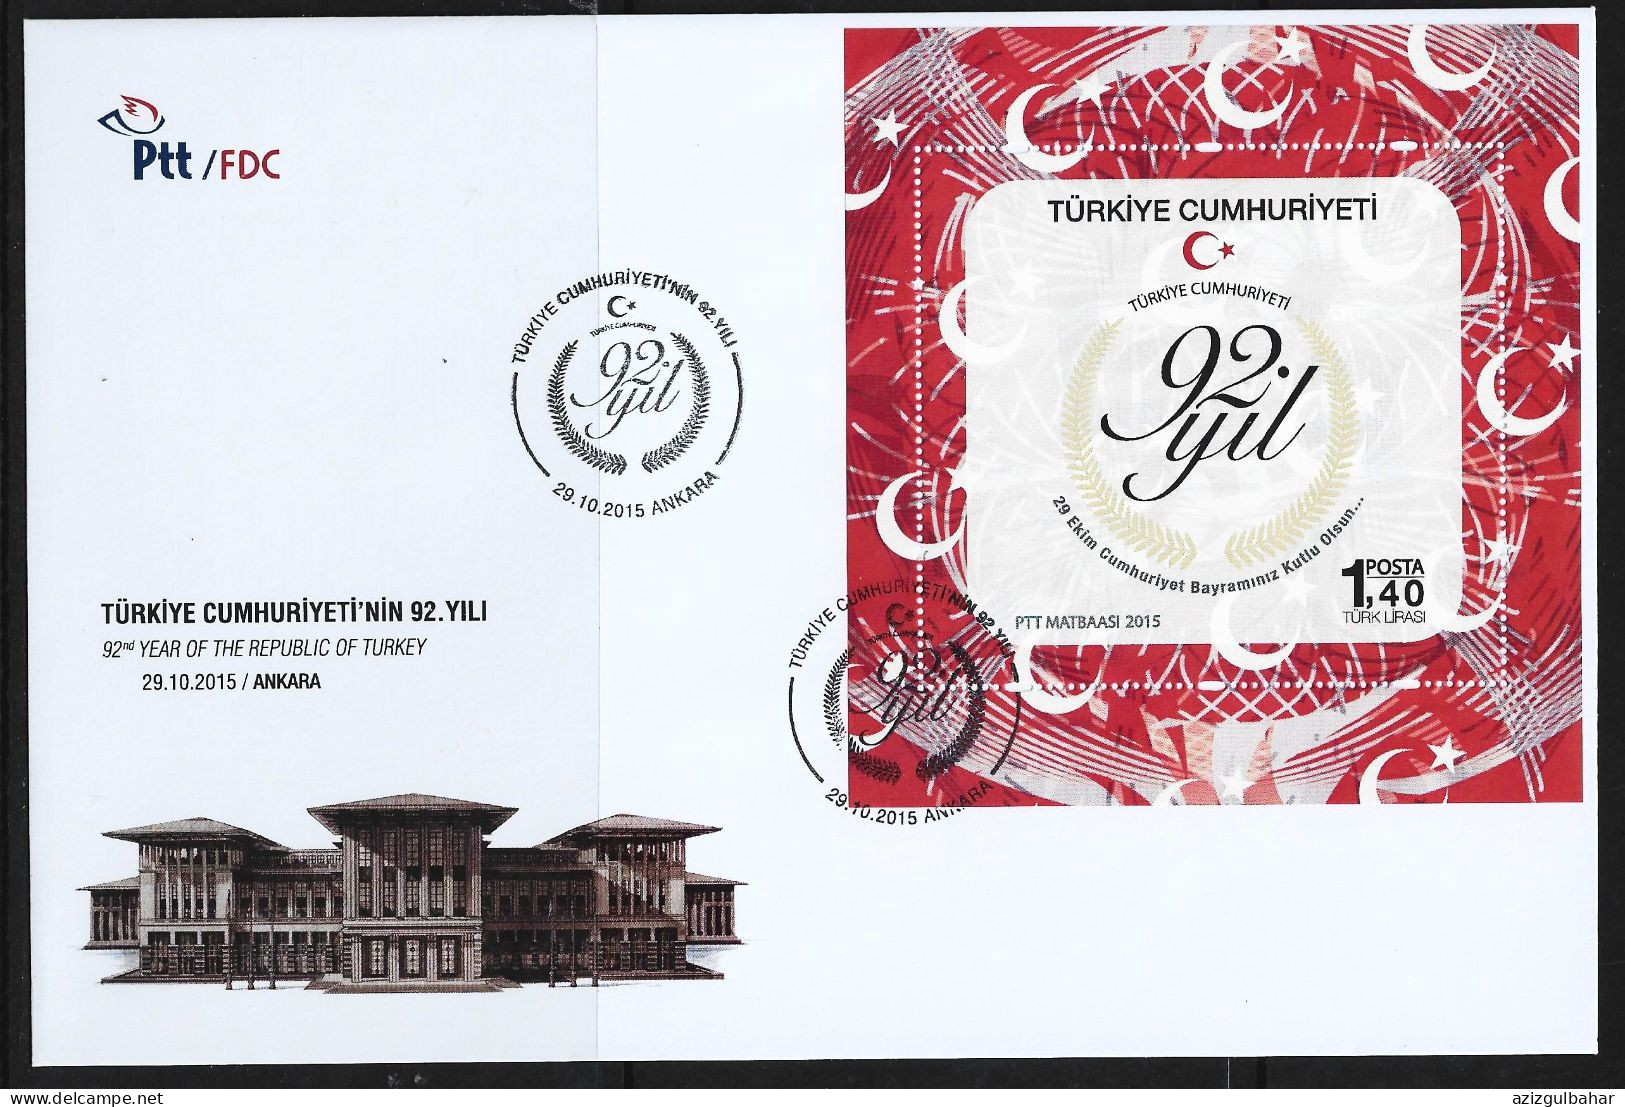 TURKEY - 92 YEAR OF THE REPUBLIC OF TURKEY  -  29 OCTOBER 2015- FDC - FDC